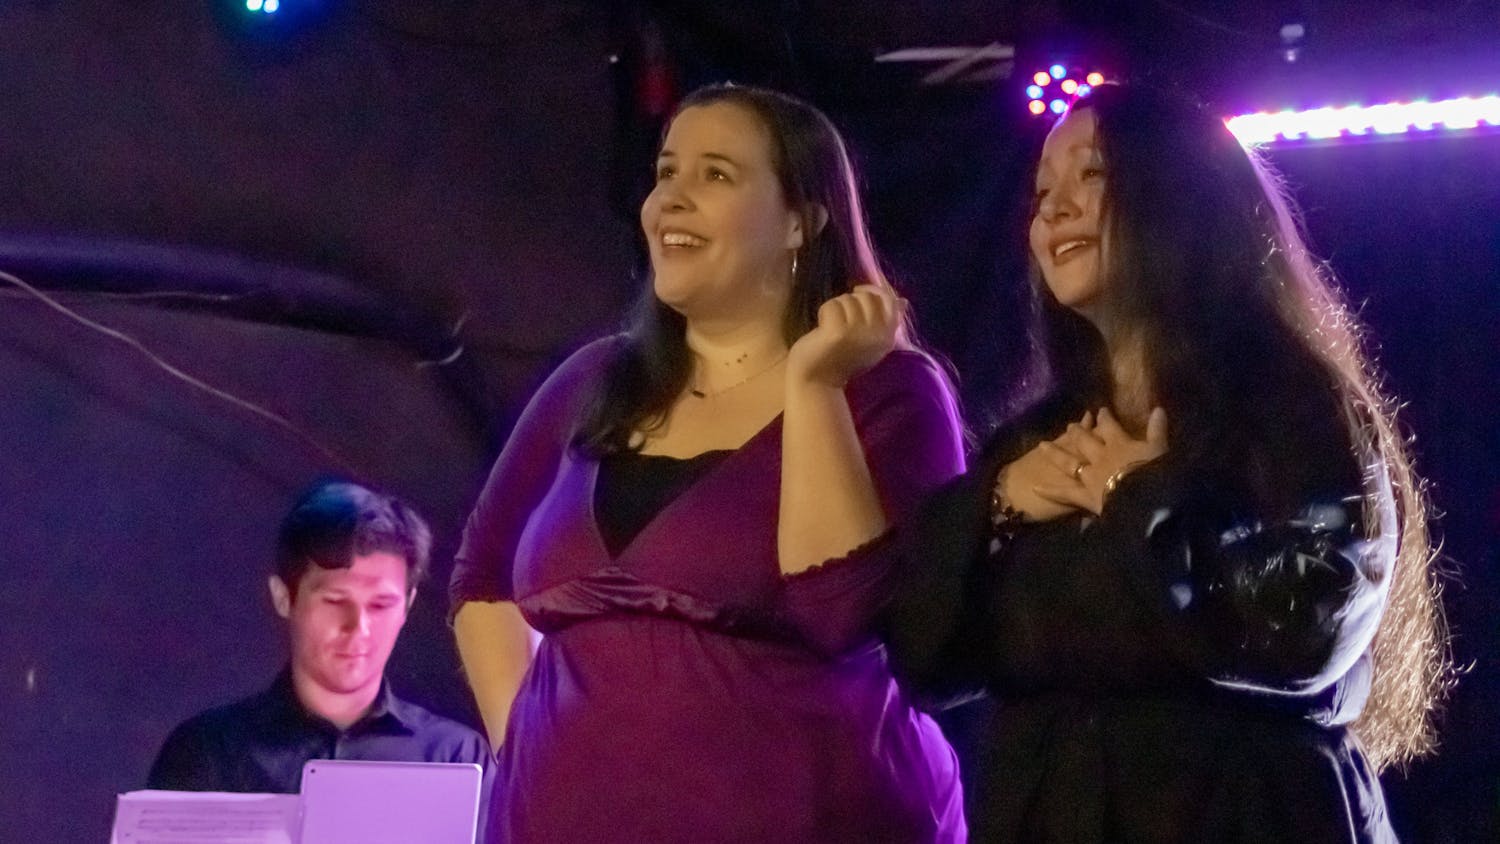 Maria Beery (left) and Jennifer Mitchell (right) sing about their respective love lives during the performance of "Four Singers Walk Into A Bar" on March 26, 2023. They performed at New Brookland Tavern and various local bars in the Columbia area.